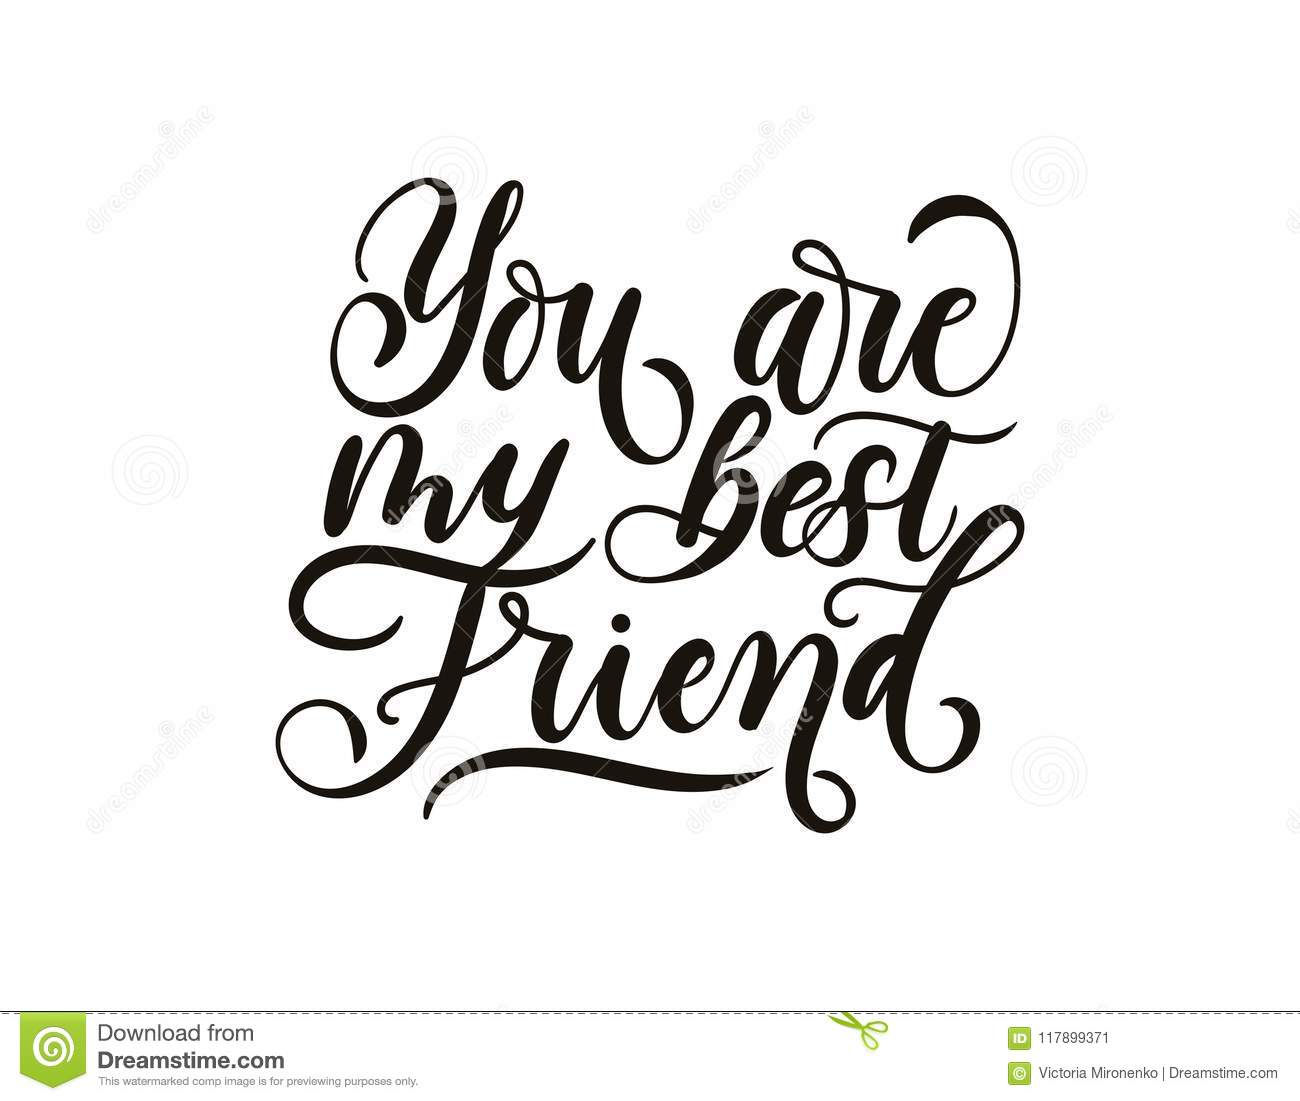 Detail Gambar You Are My Best Friend Nomer 15